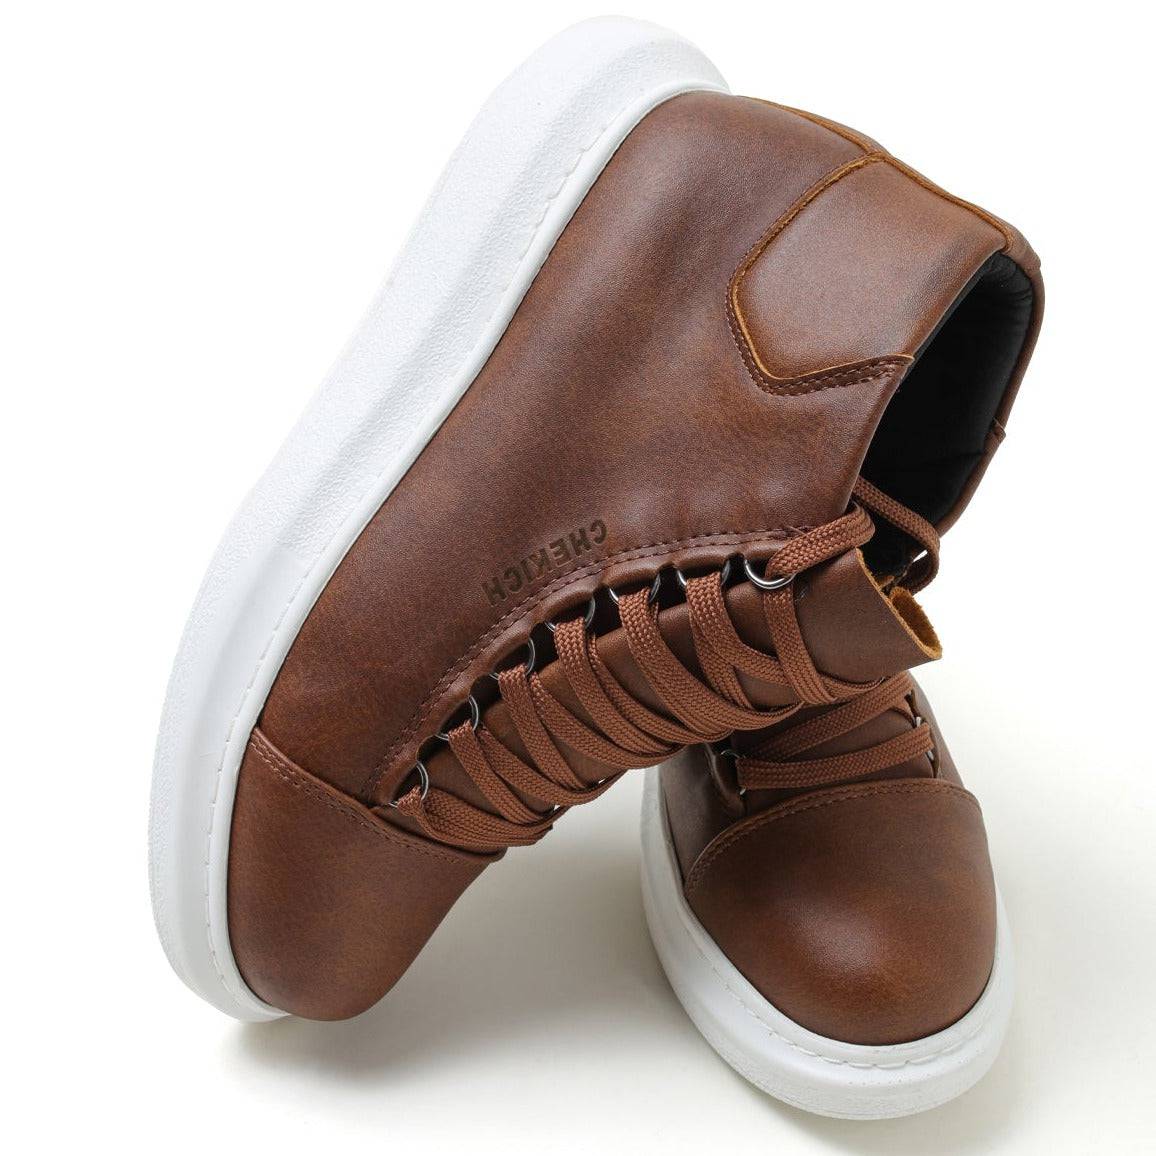 High Top Platform Sneakers for Men by Apollo | Kelly in Rustic Rendezvous